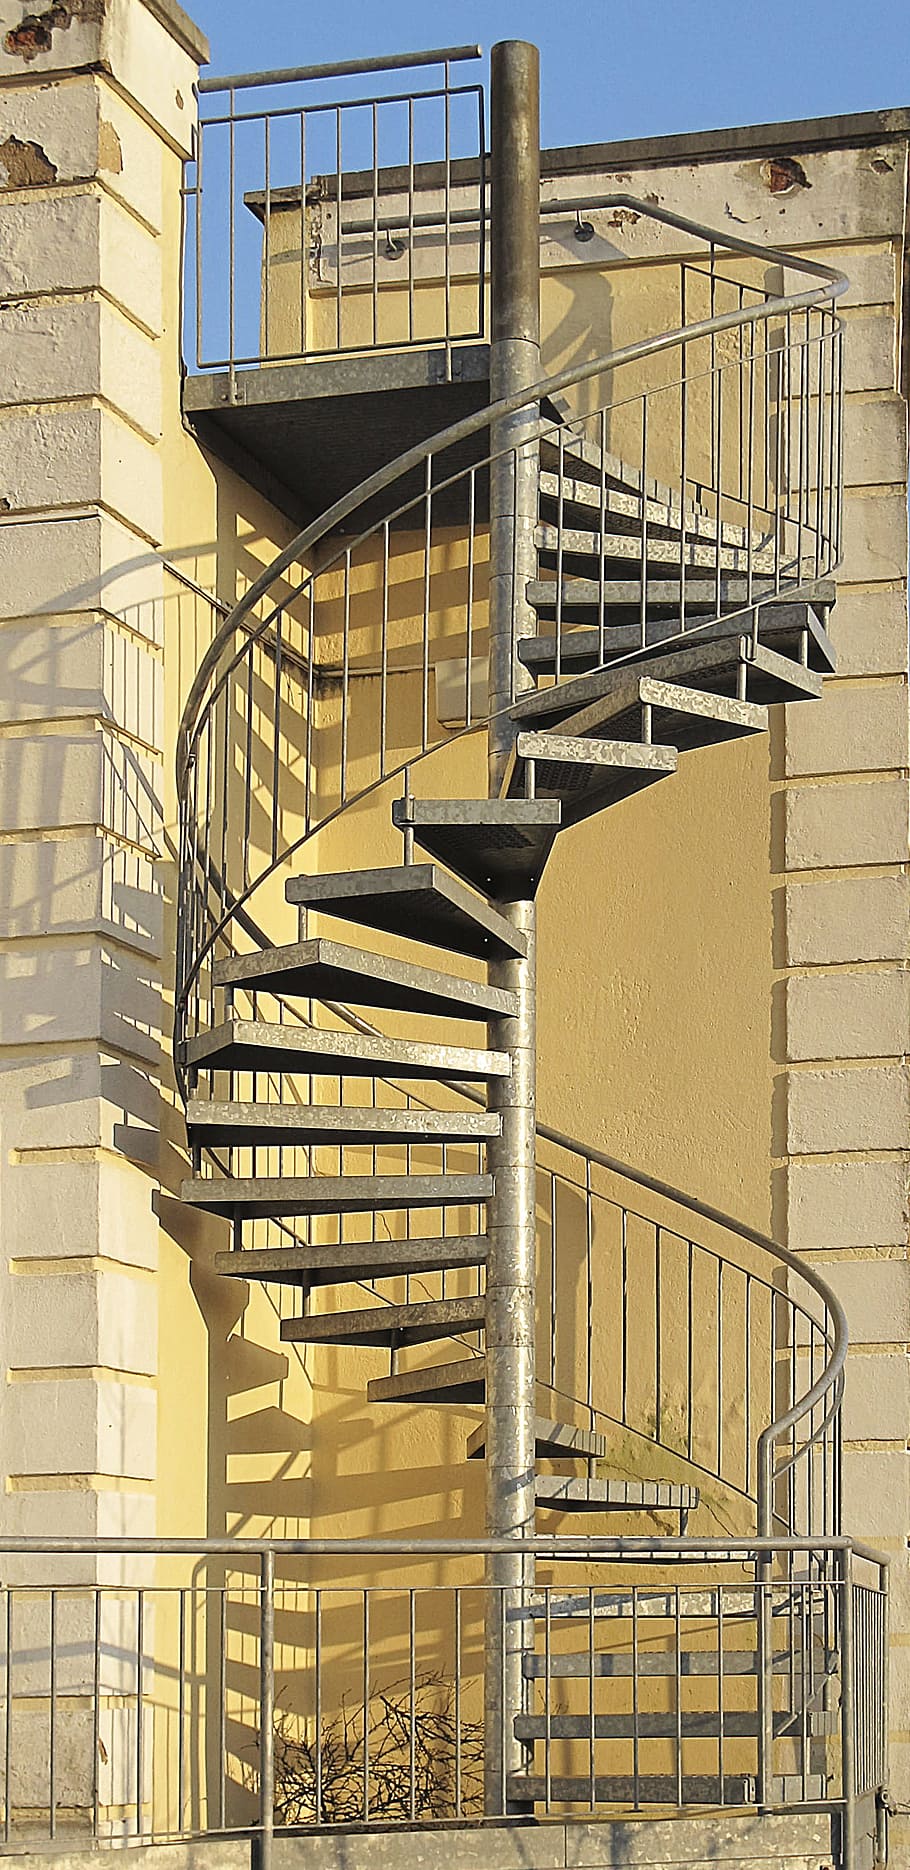 spindle staircase, external staircase, spiral staircase, steel stairs, steel spiral staircase, metal construction, staircase, railing, emergency staircase, escape stairs